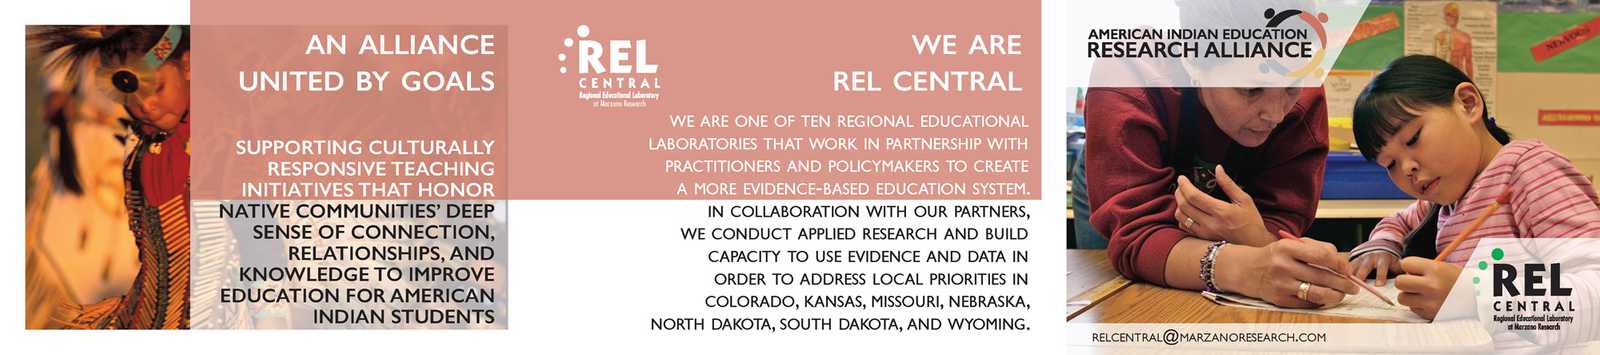 REL Central project example image.